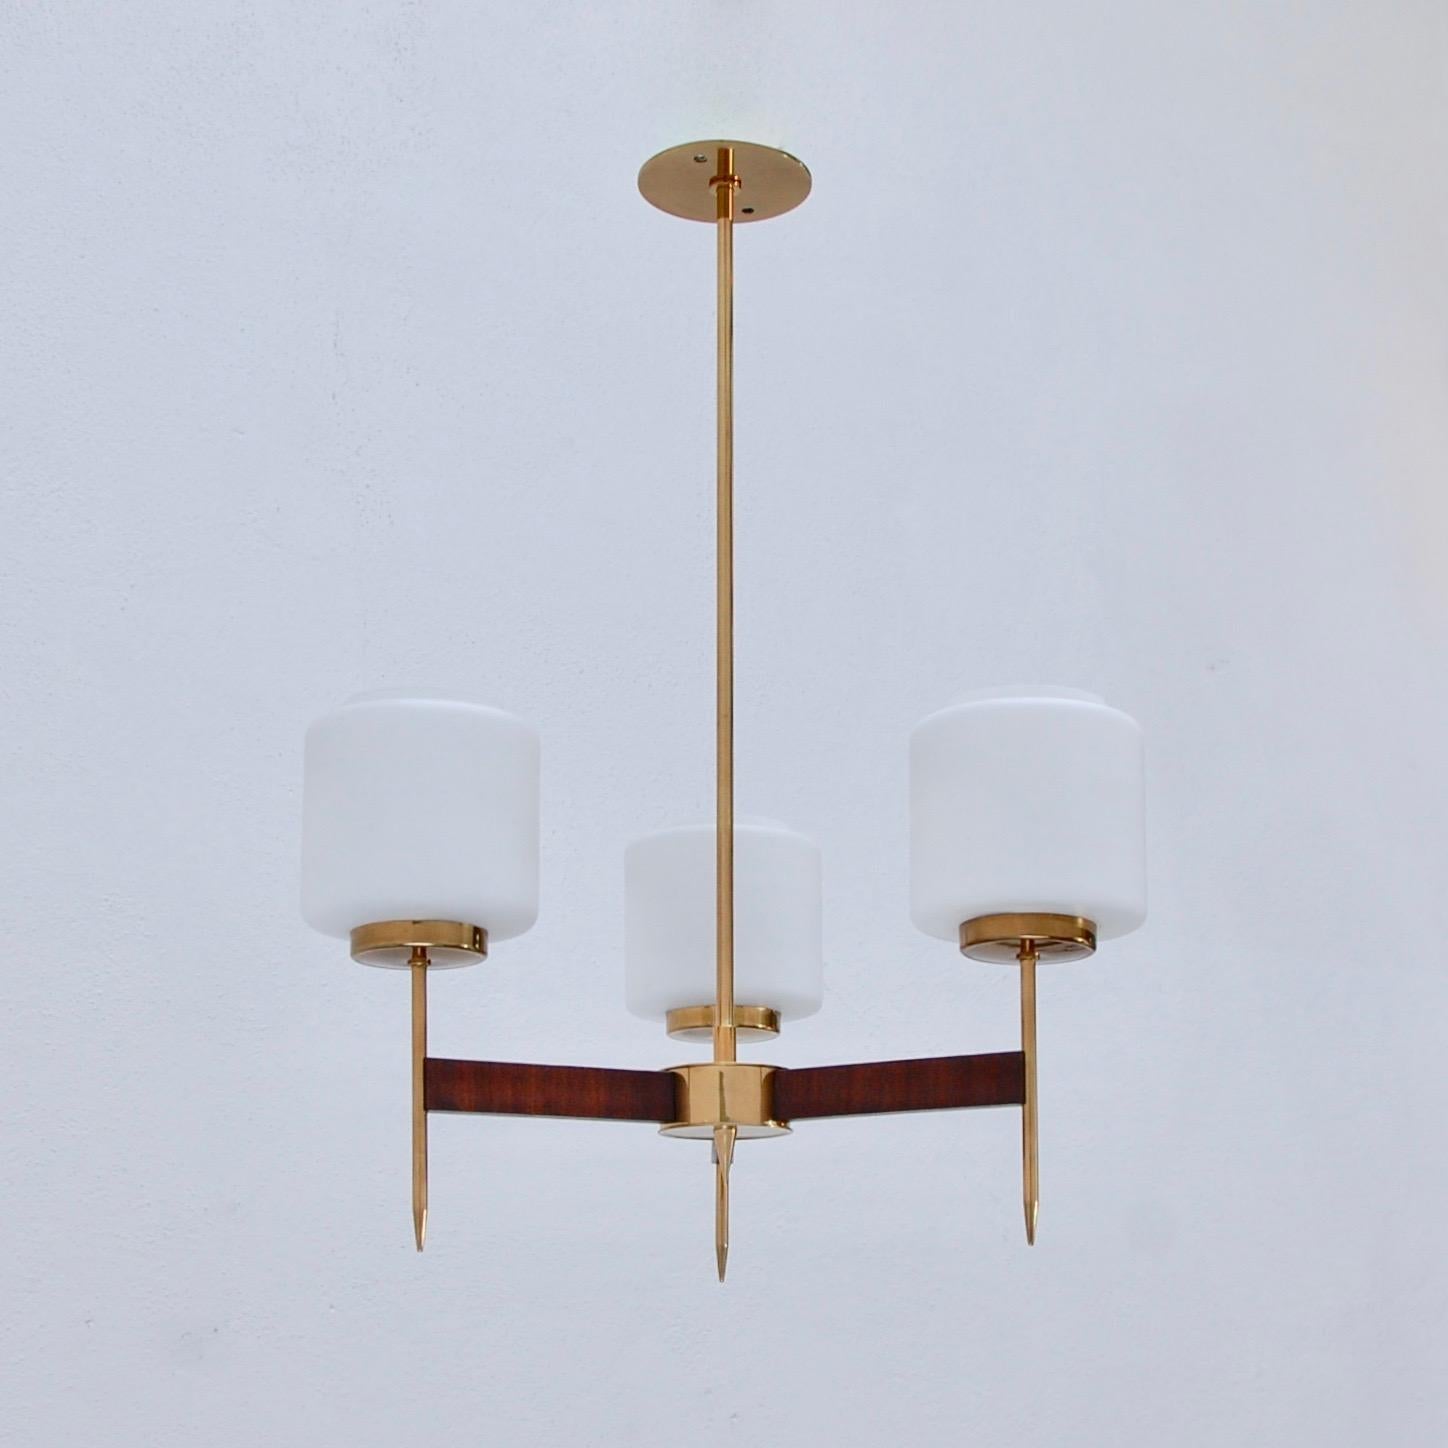 Elegant three shade hanging light in teak wood, brass and molded glass shades from 1950s Italy. Fully restore. Wired for the US with a single E12 candelabra based socket per shade. (3 total) Light bulbs included. Overall drop adjustable upon